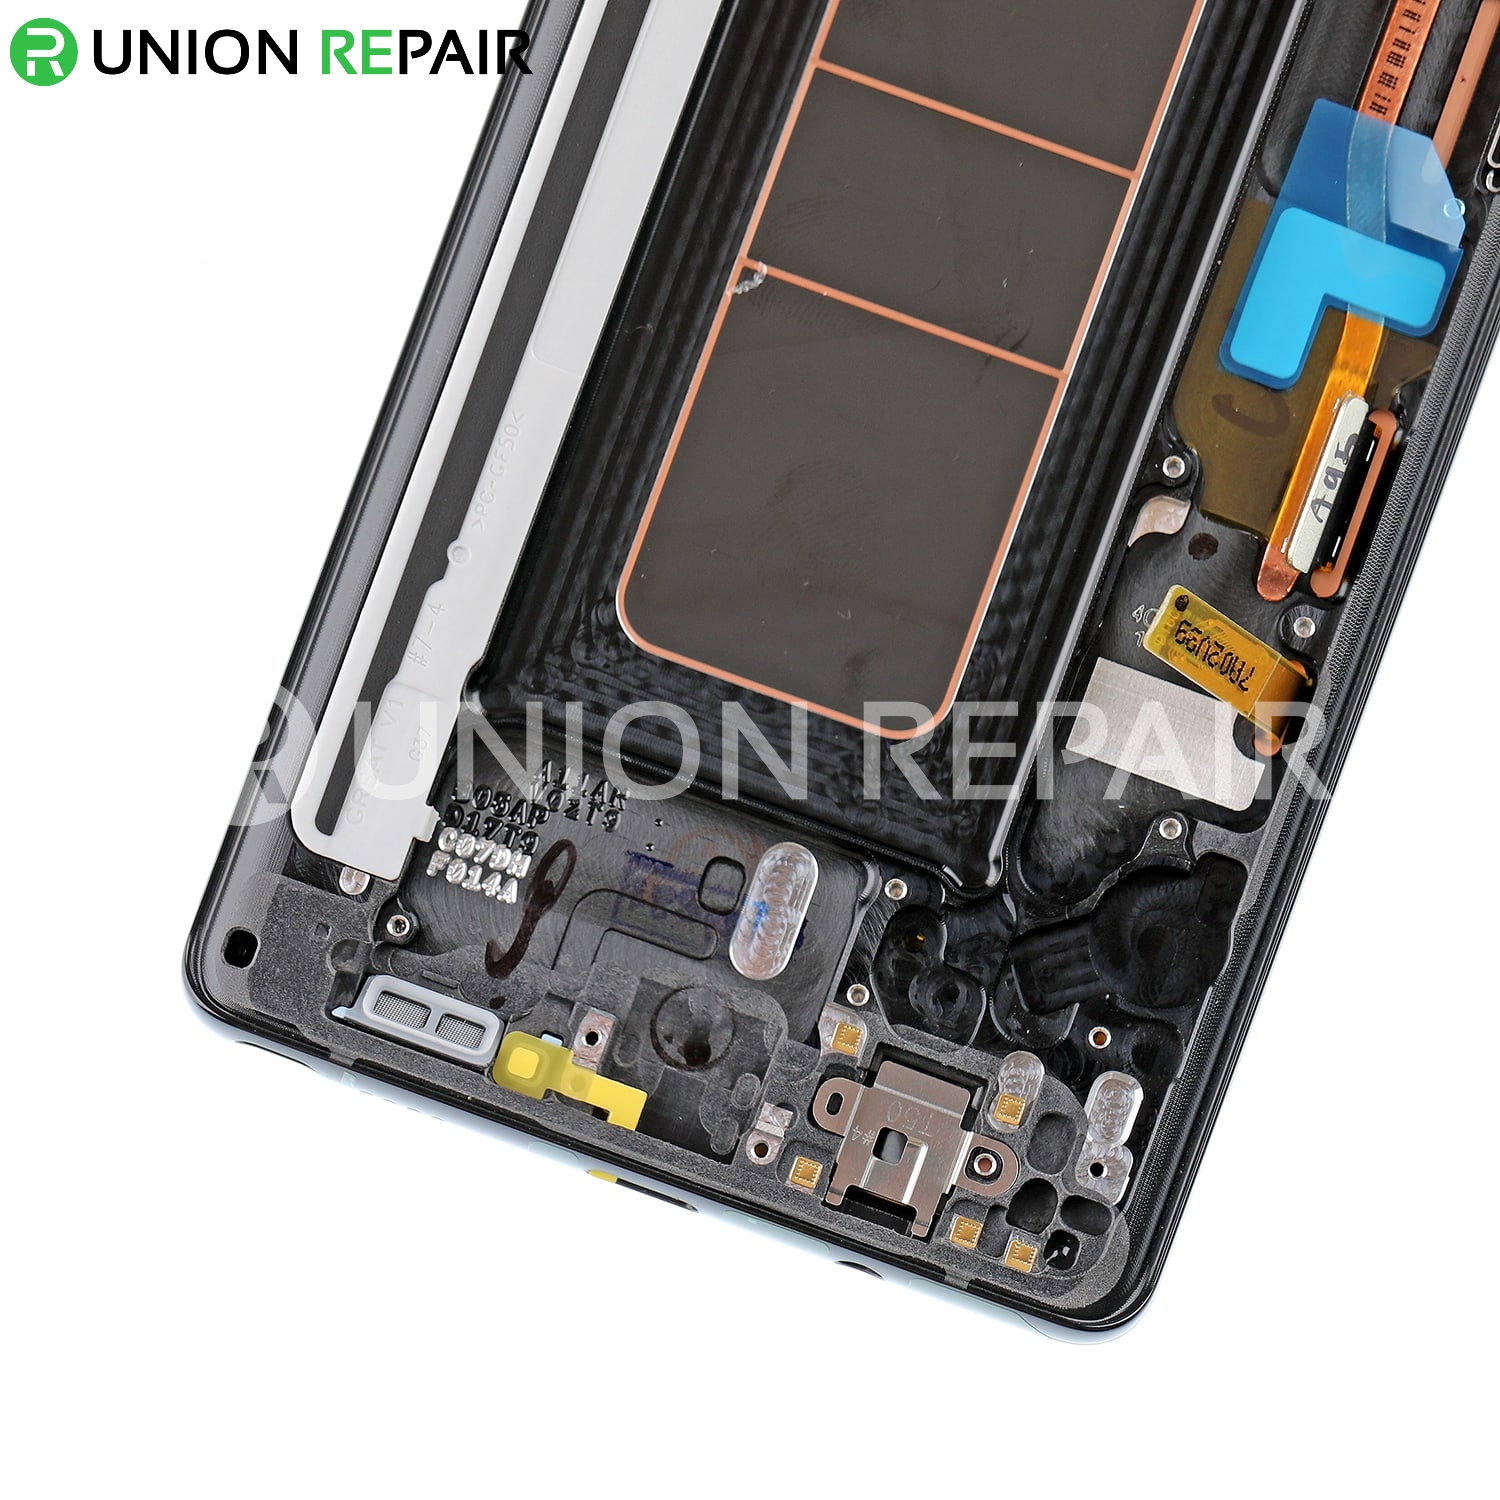 Replacement for Samsung Galaxy Note 8 SM-N950 LCD Screen Assembly with Frame - Black